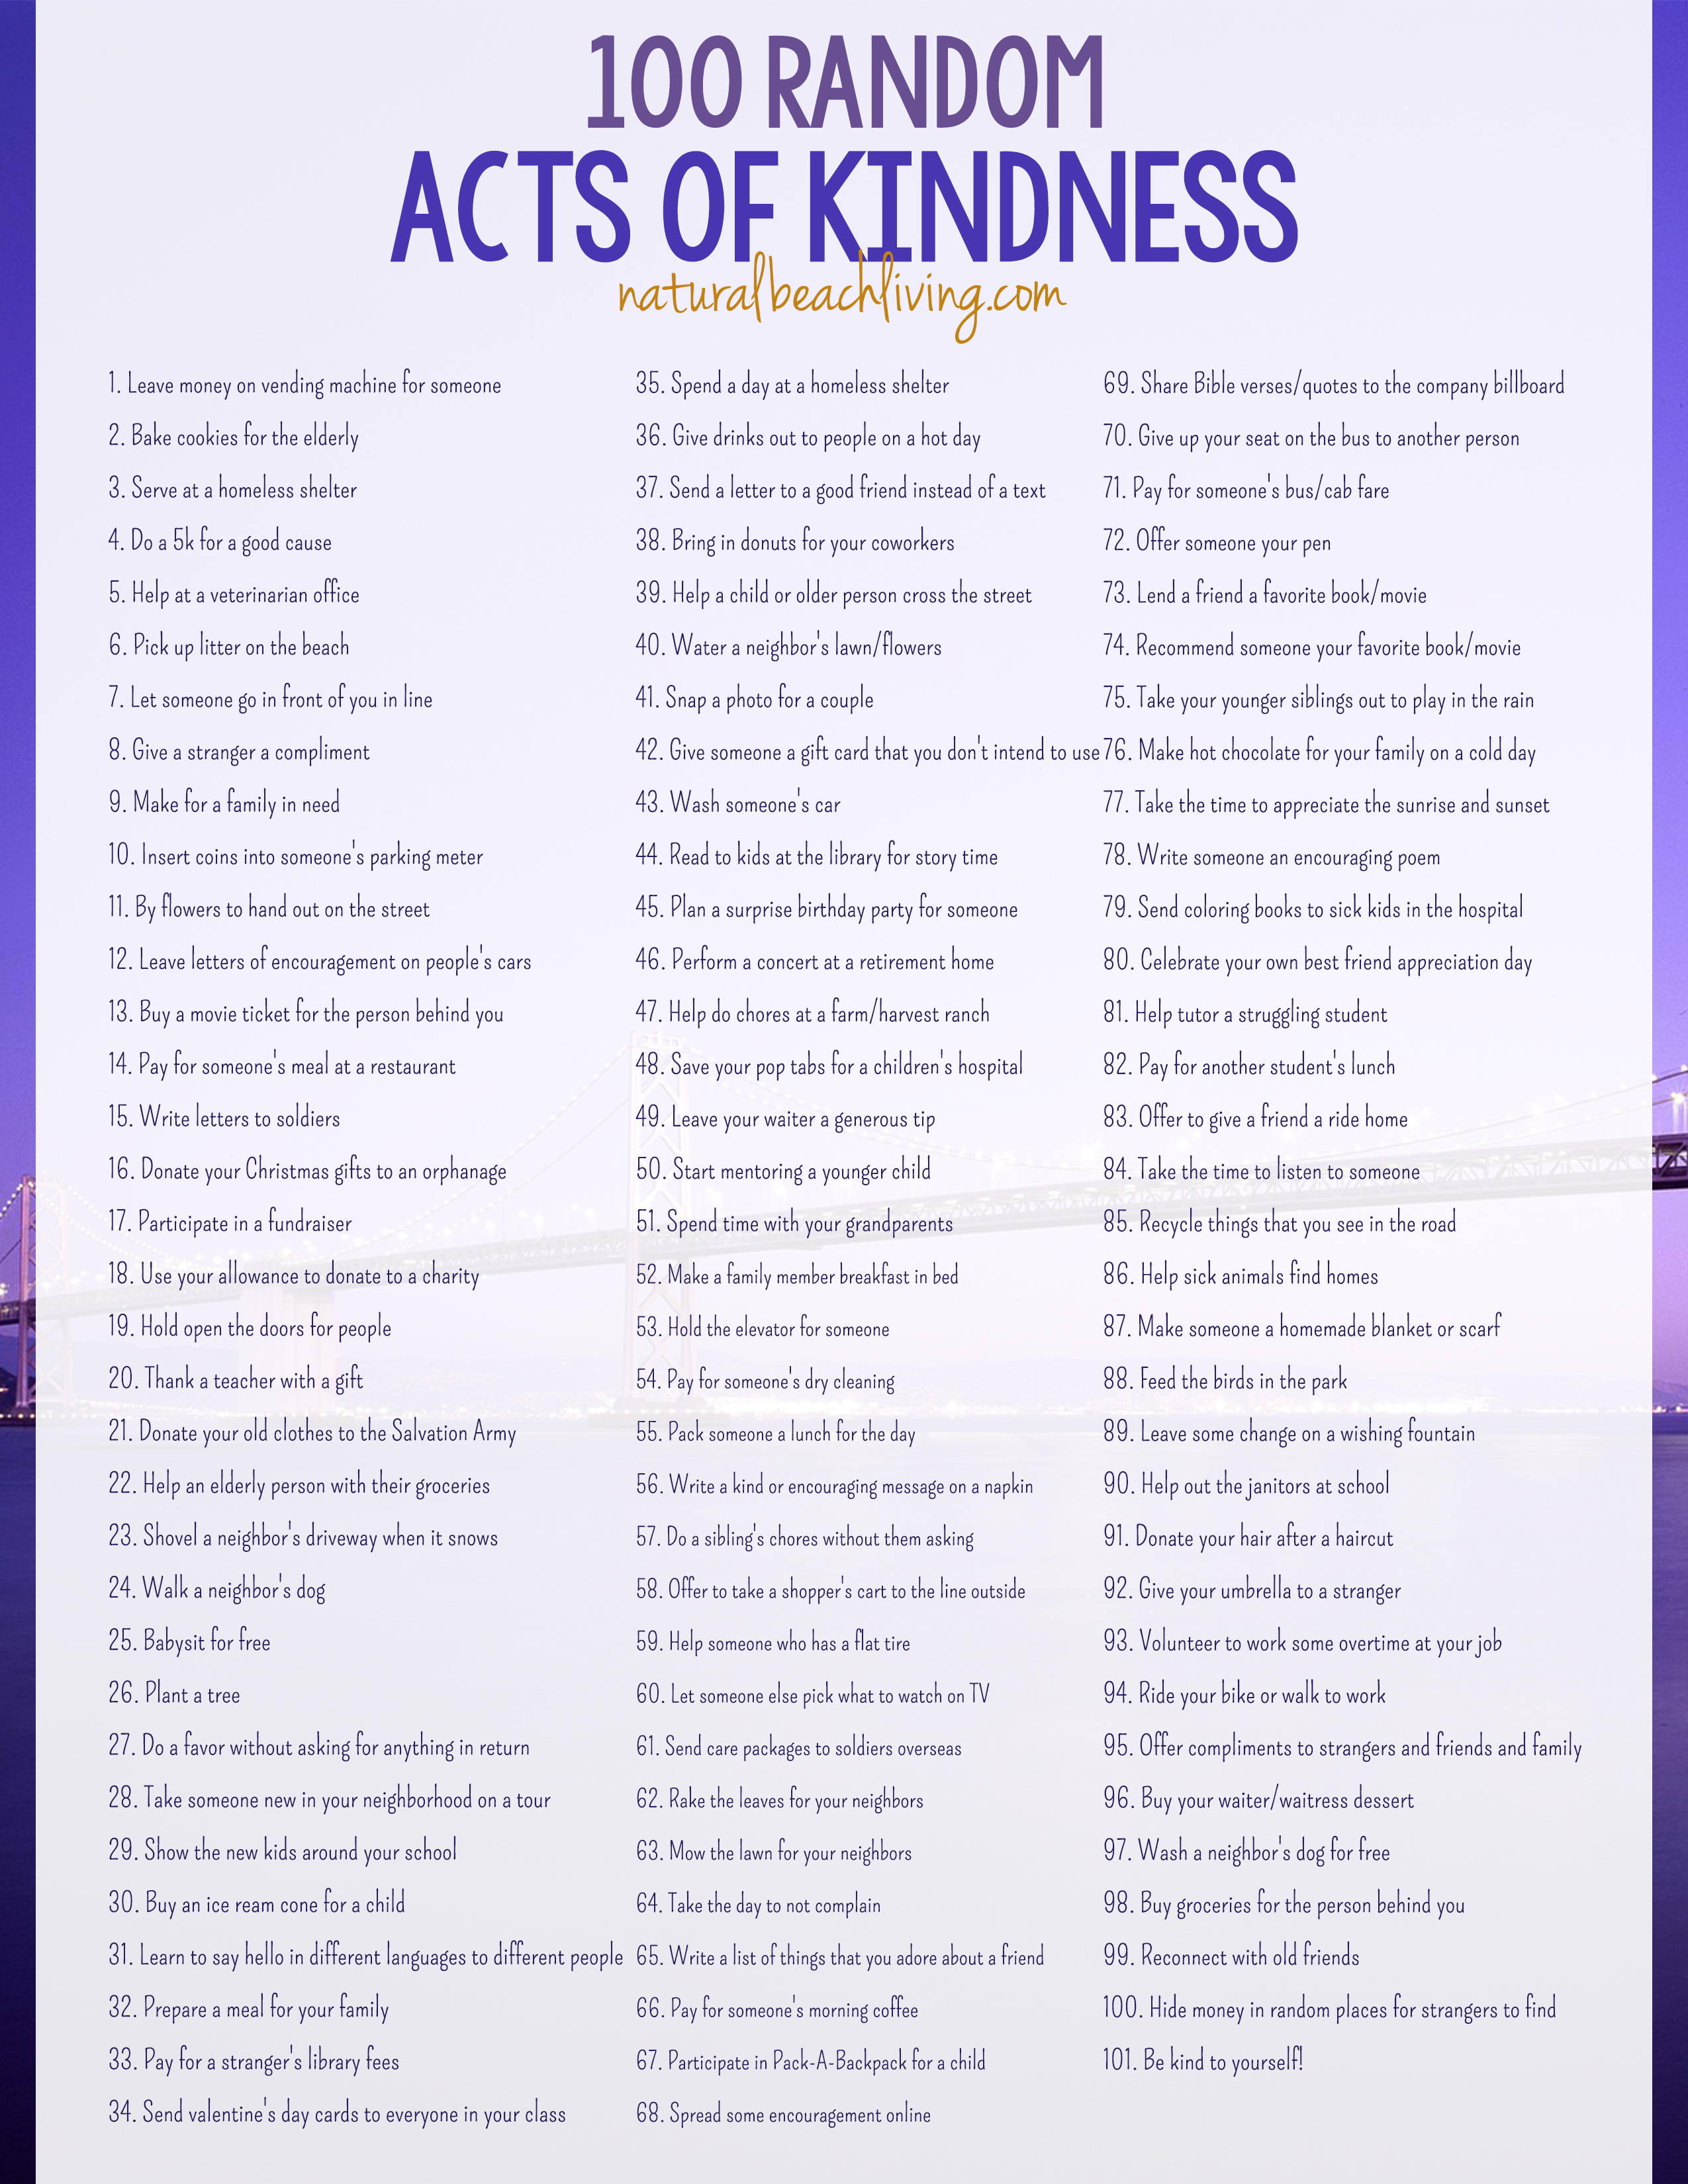 101 Best Random Acts of Kindness Ideas, Free Printable, Acts of Kindness for Families, Kids, Everyone, Easy Ways to Show Kindness, Great Ideas!